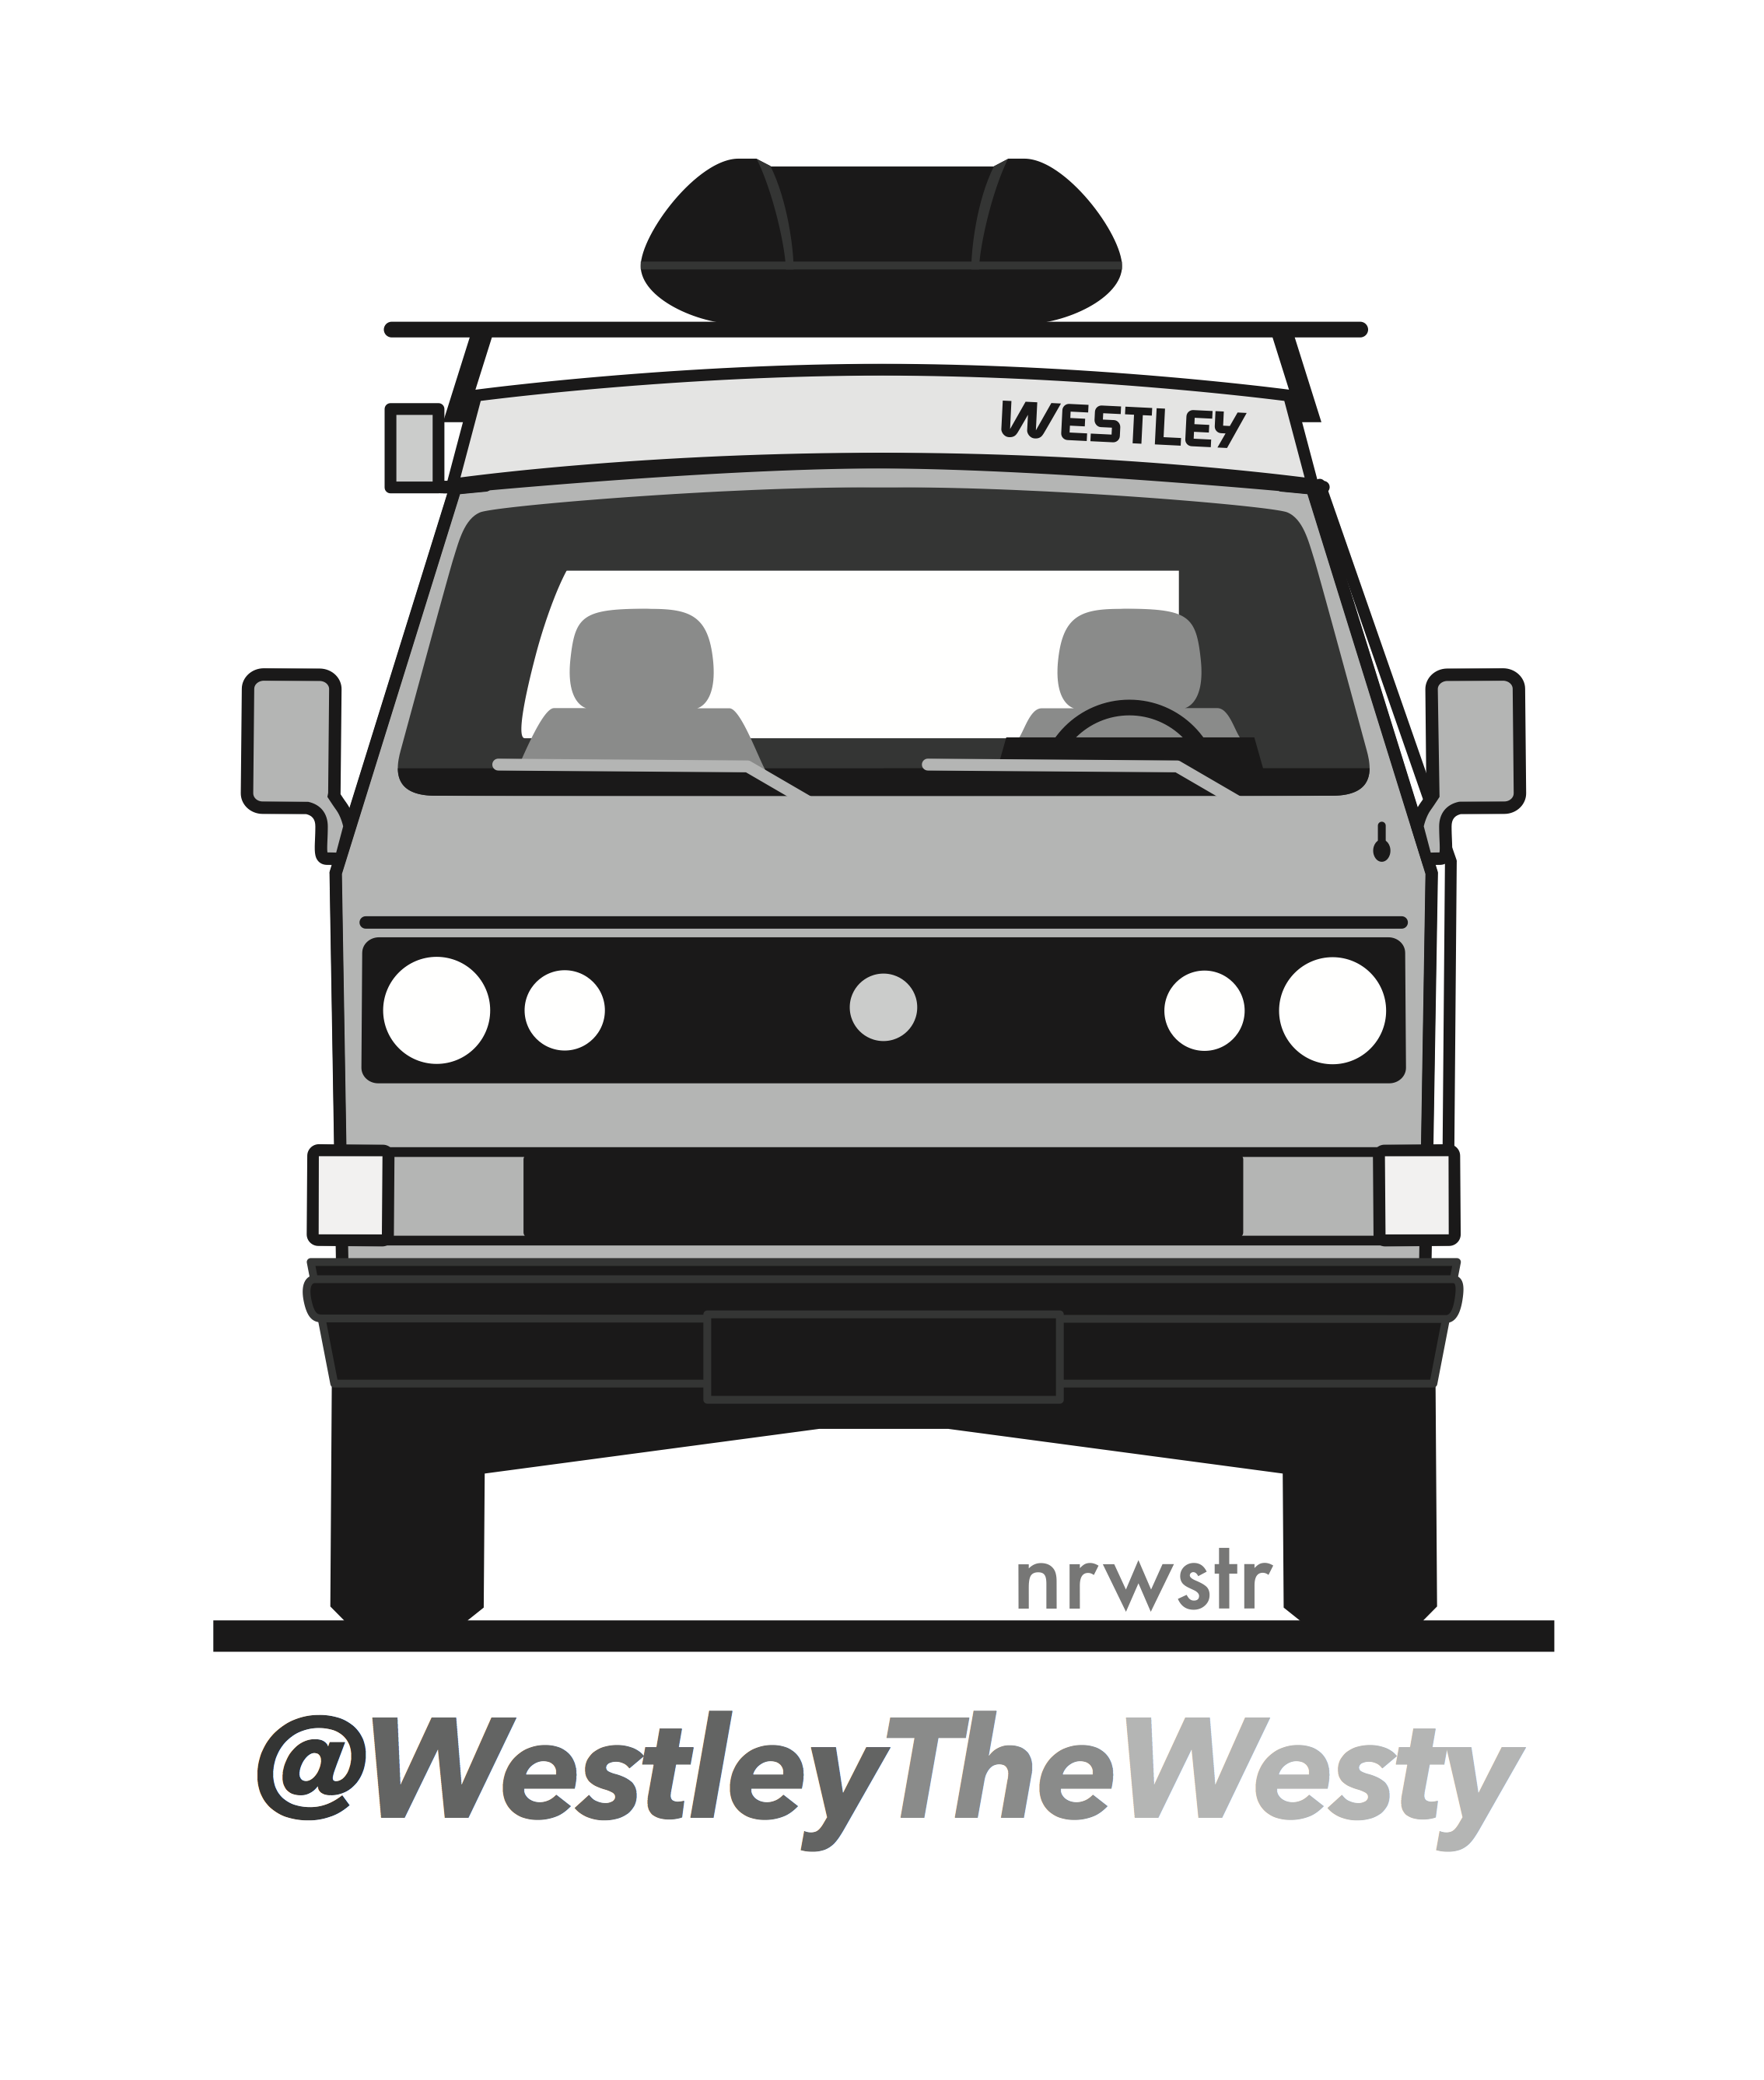 westleythewesty front view.png